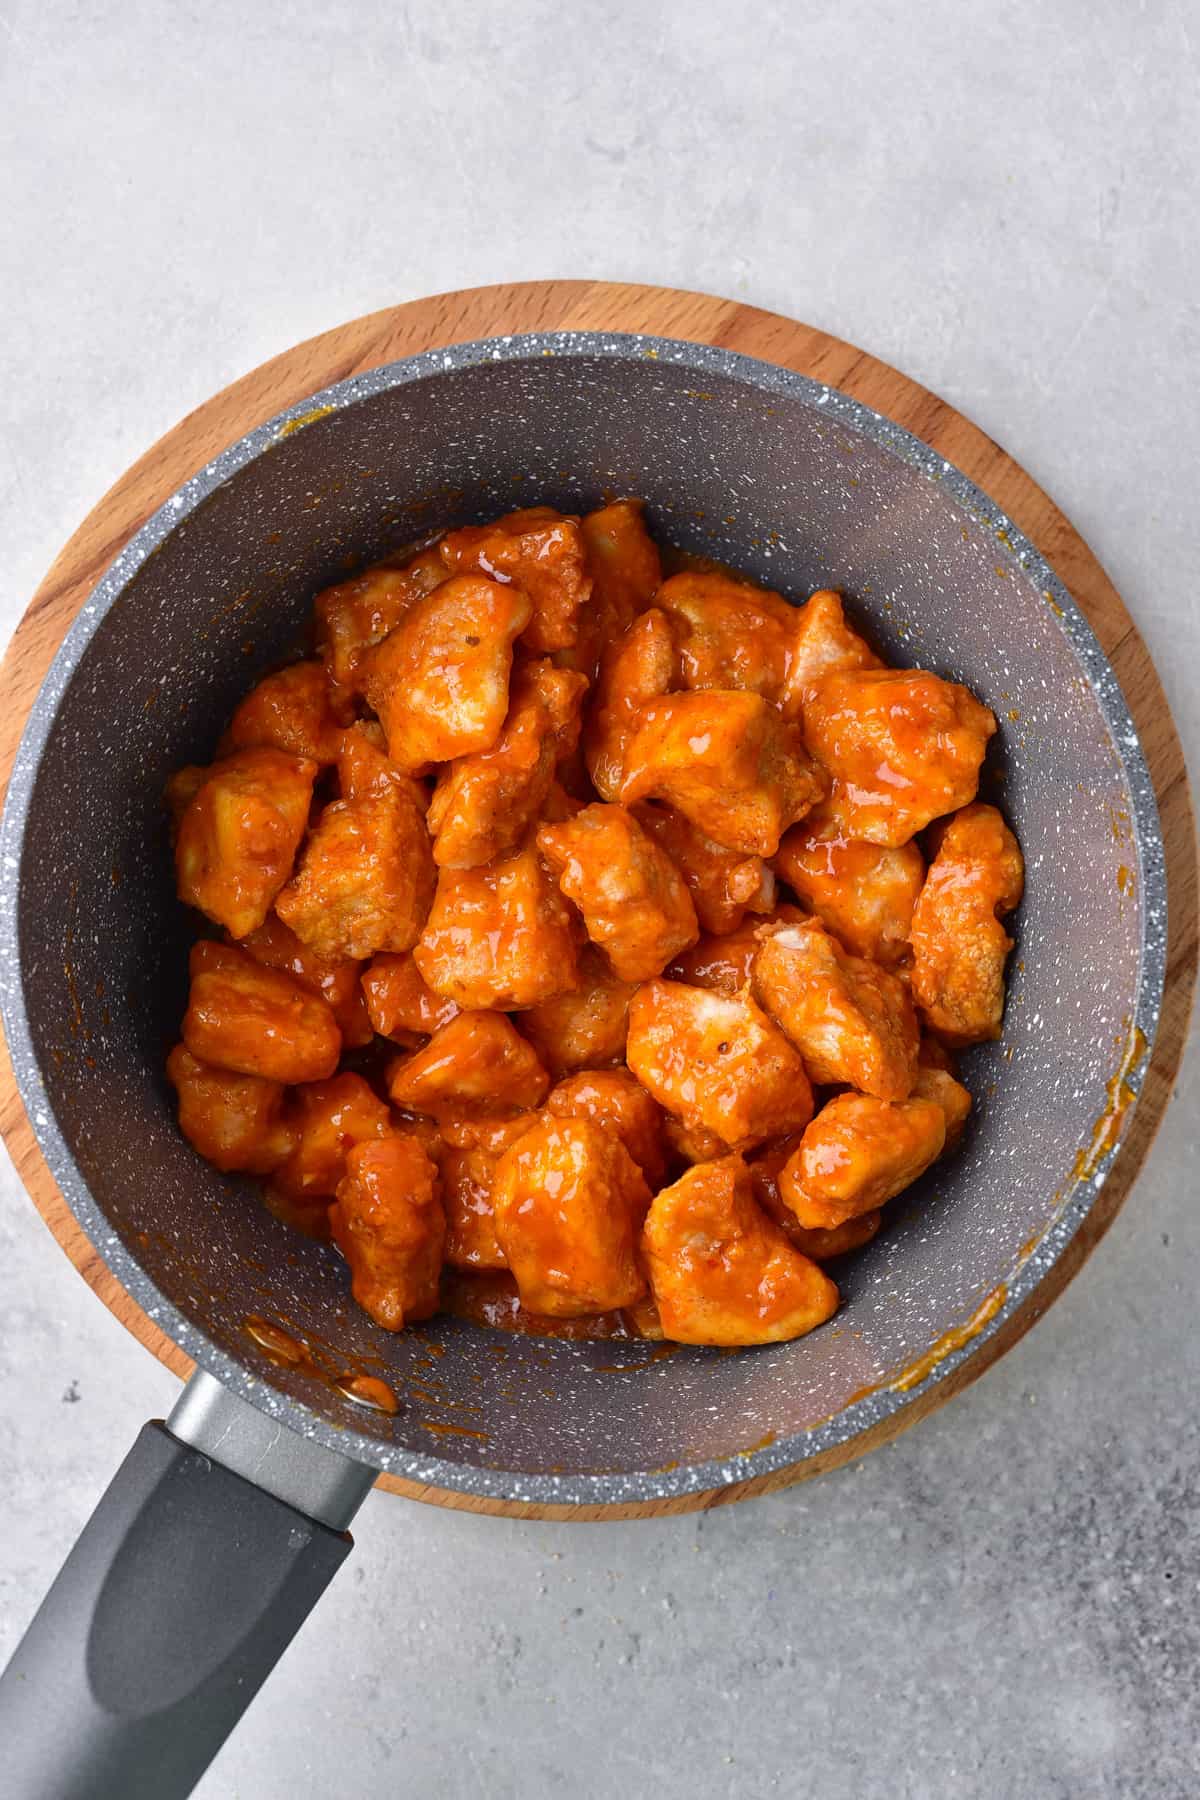 Tossing the crispy chicken bites in Buffalo sauce.